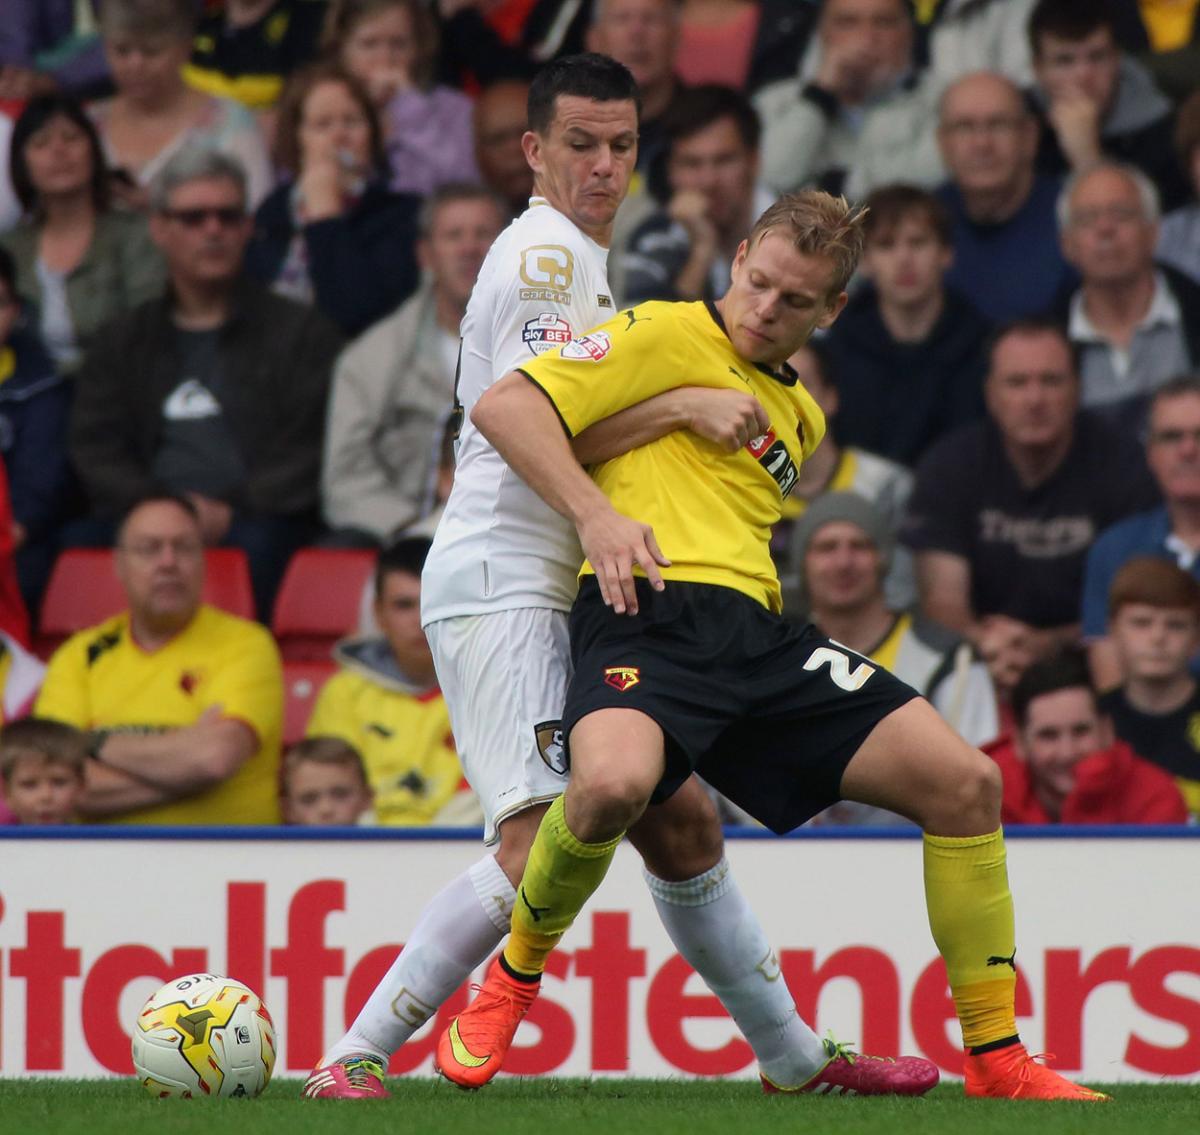 All our pictures of Watford v AFC Bournemouth on Saturday, September 20 2014. Pictures by Jon Beal.